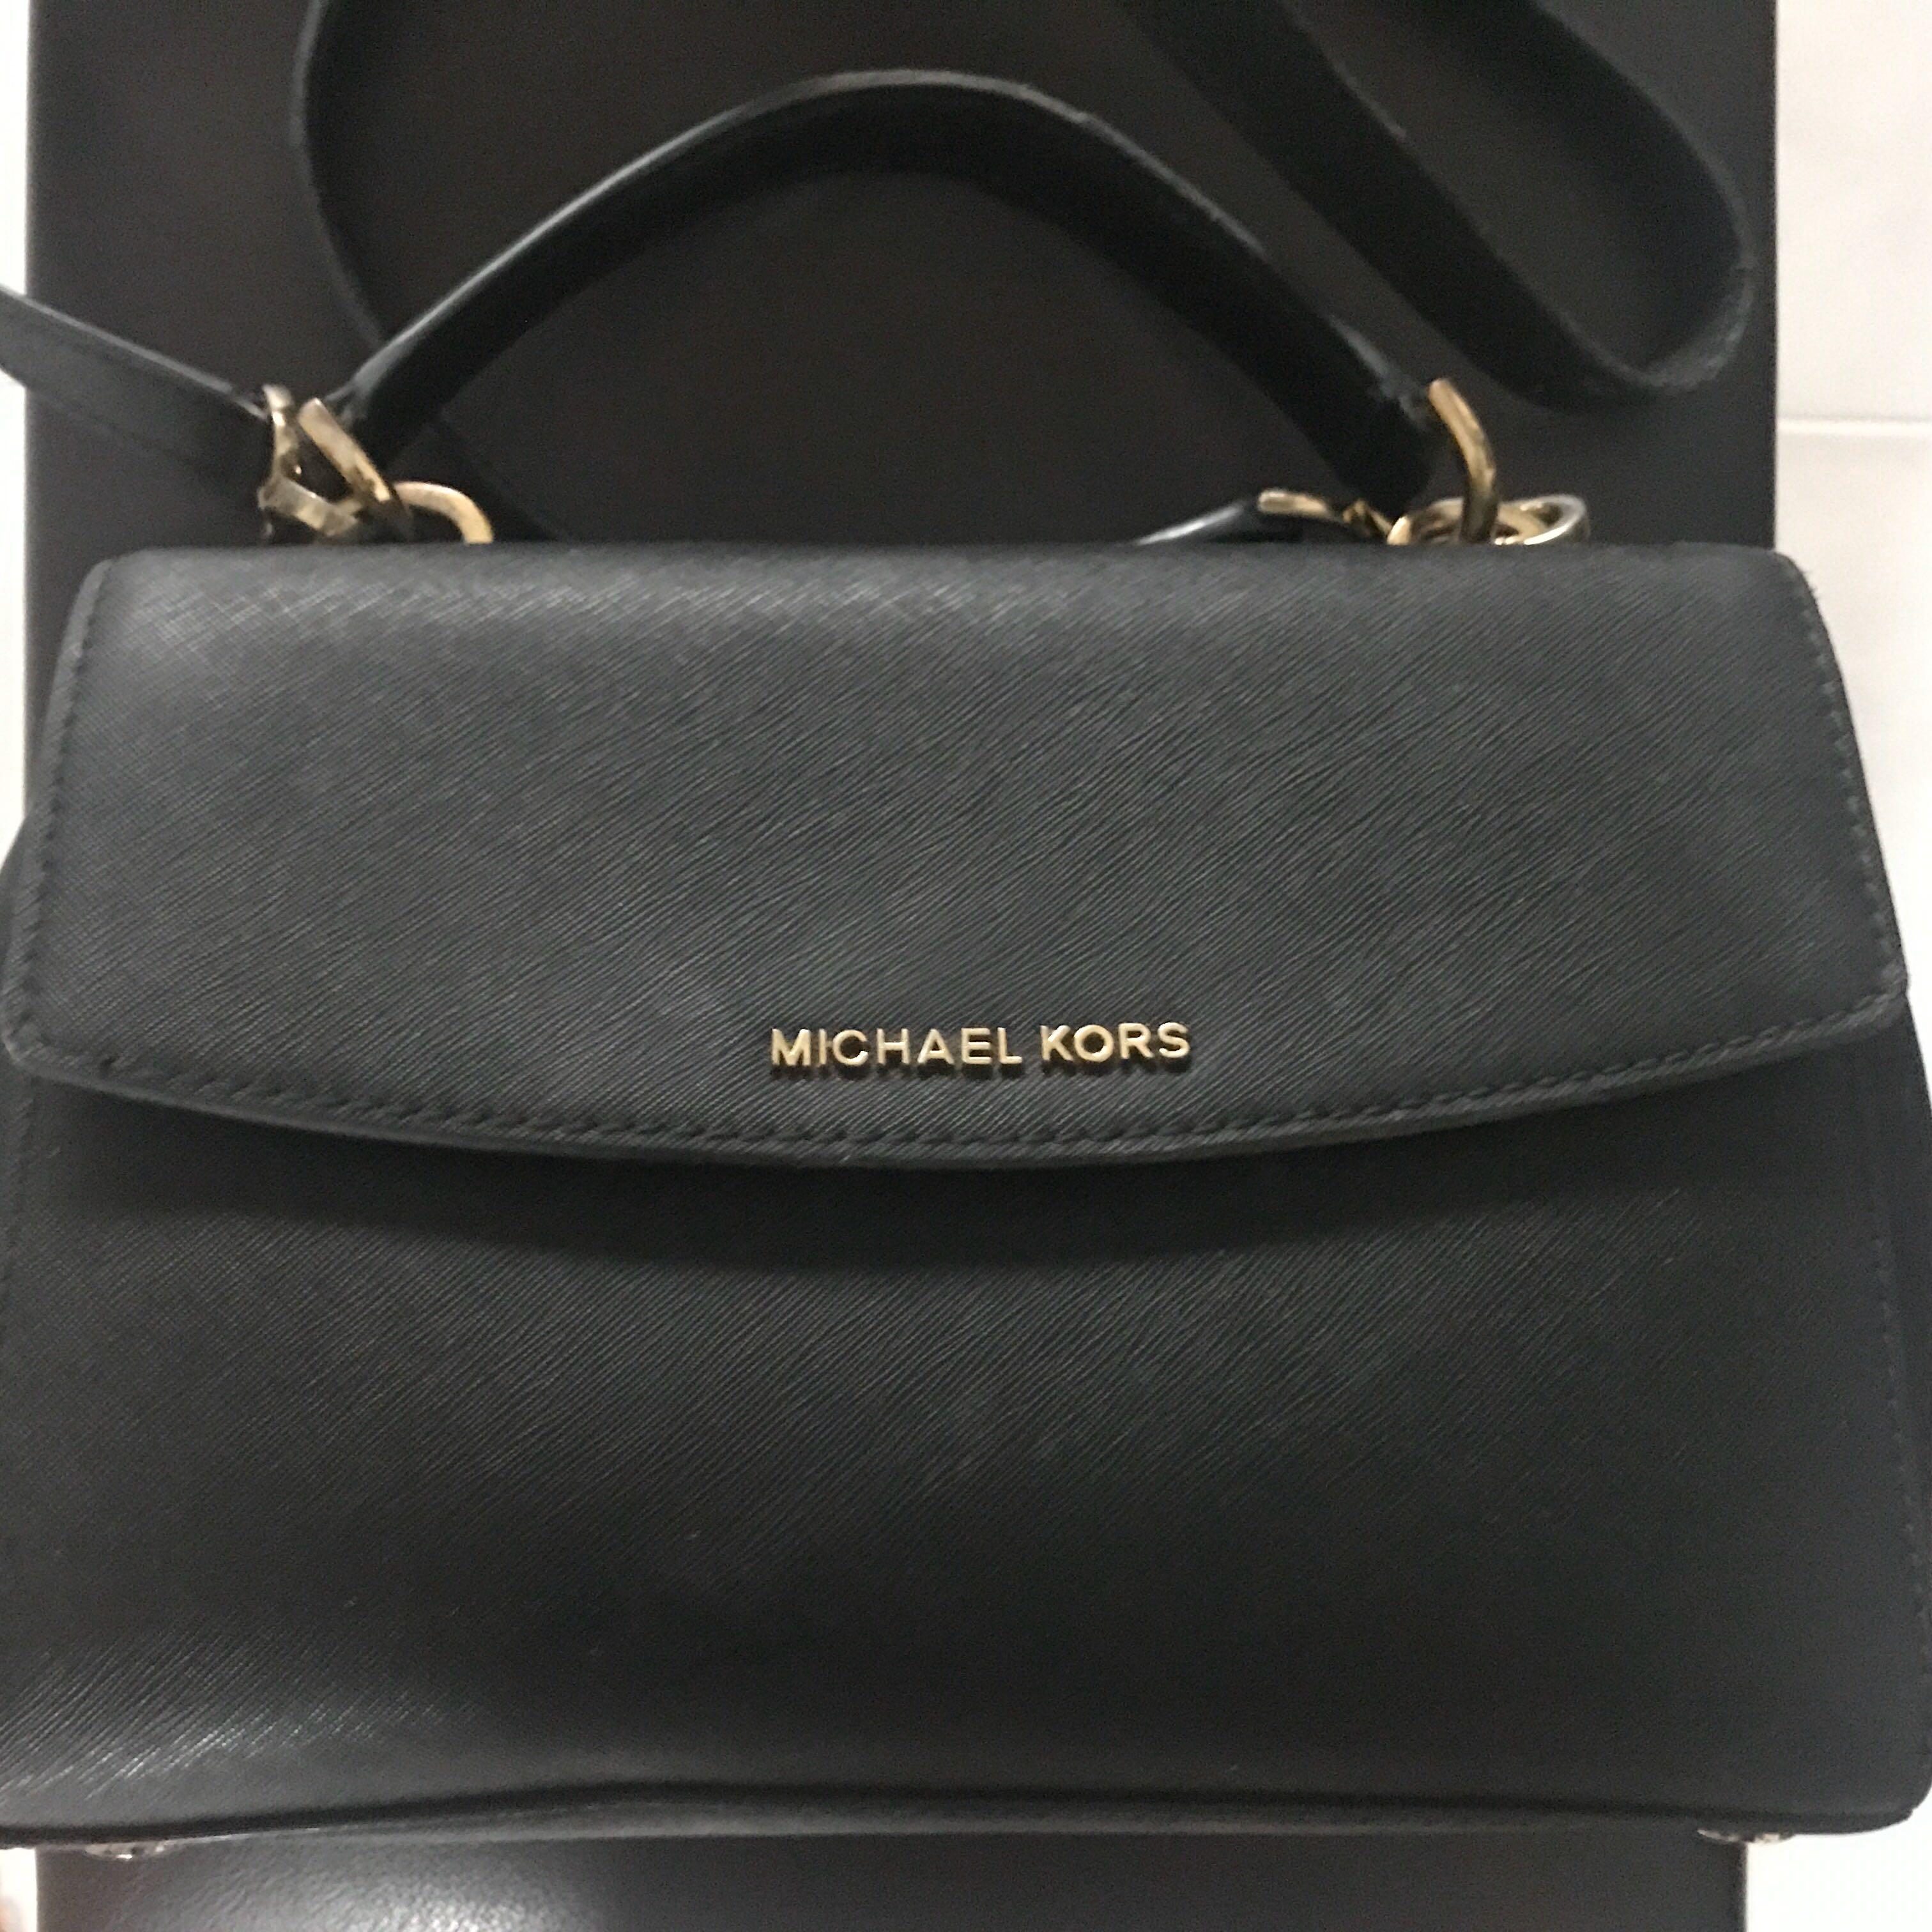 Authentic Michael Kors Ava Medium Saffiano Leather Satchel Bag, Women's  Fashion, Bags & Wallets, Cross-body Bags on Carousell